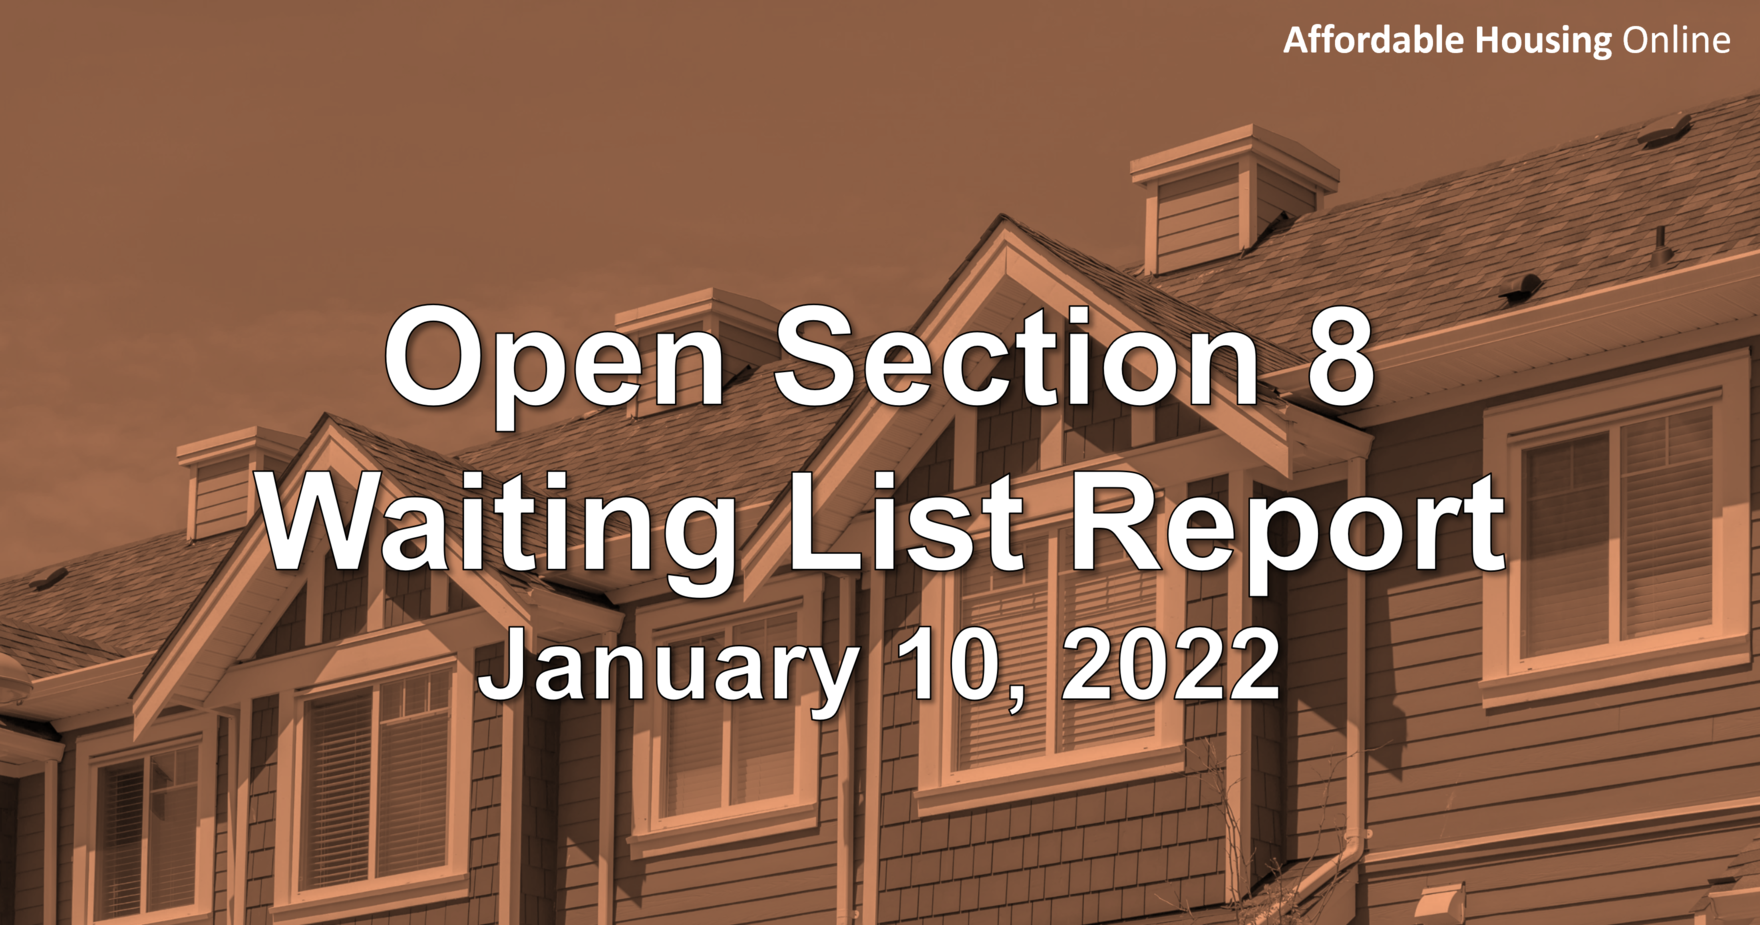 Open Section 8 Waiting List Report: January 10, 2022